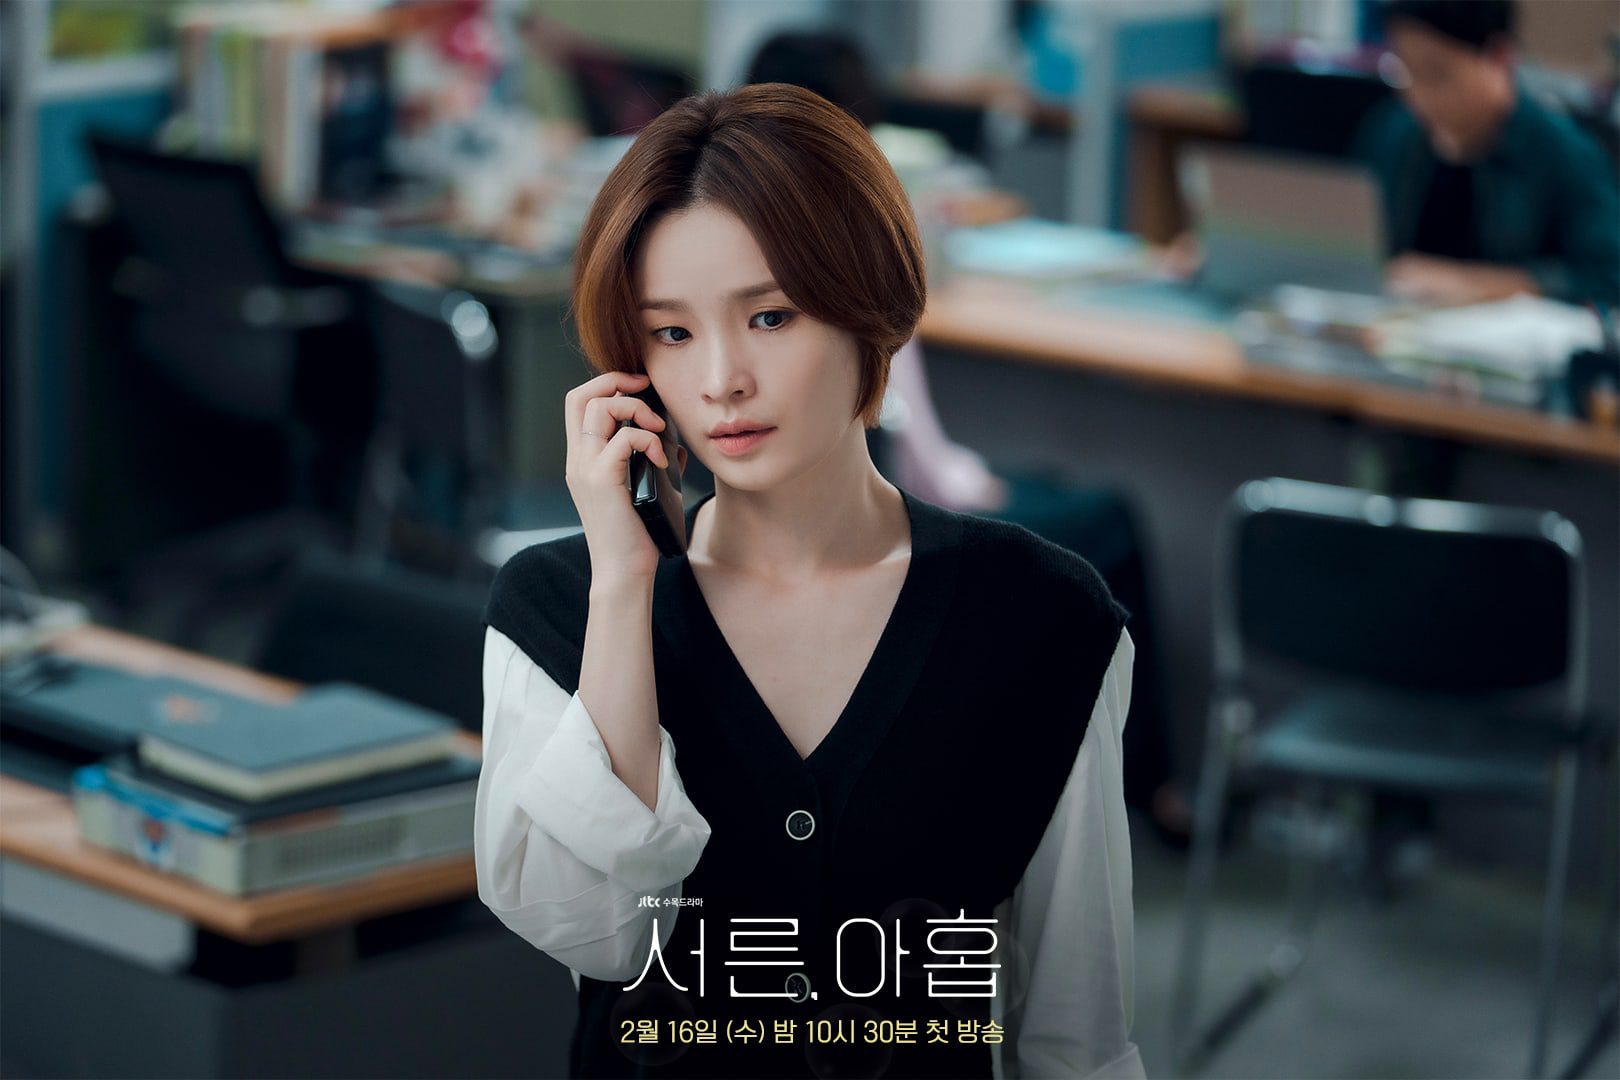 Jeon Mi Do – Talks About Her Character ‘Jung Chan Young’ in The Upcoming Drama Series ‘Thirty-Nine’